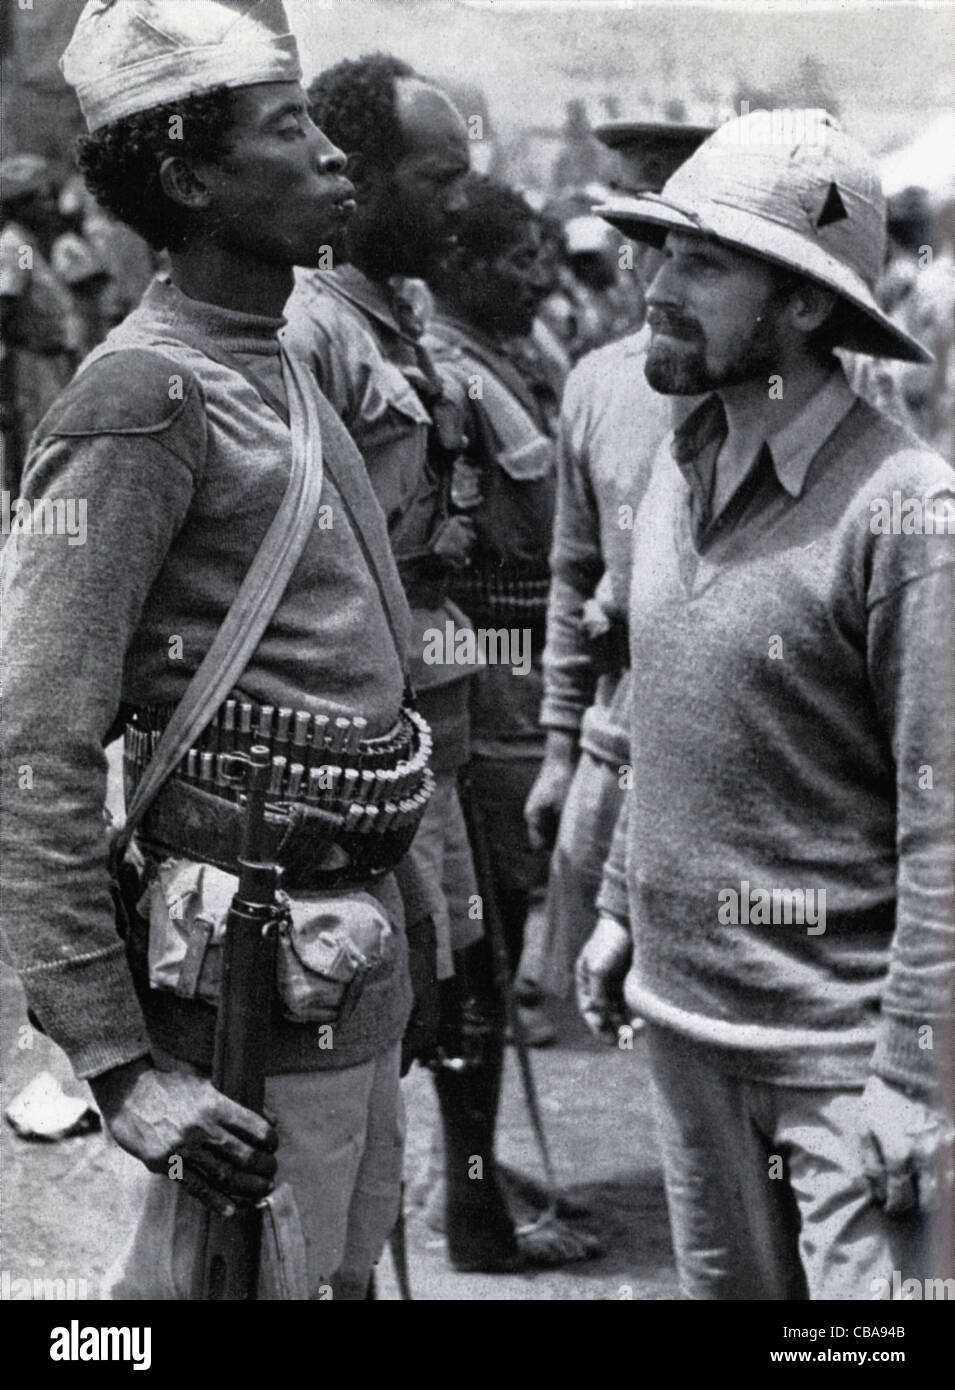 Major-General Orde Wingate, DSO, Commander of the British special forces Chindits in Burma WW11, inspects an African Soldier Stock Photo